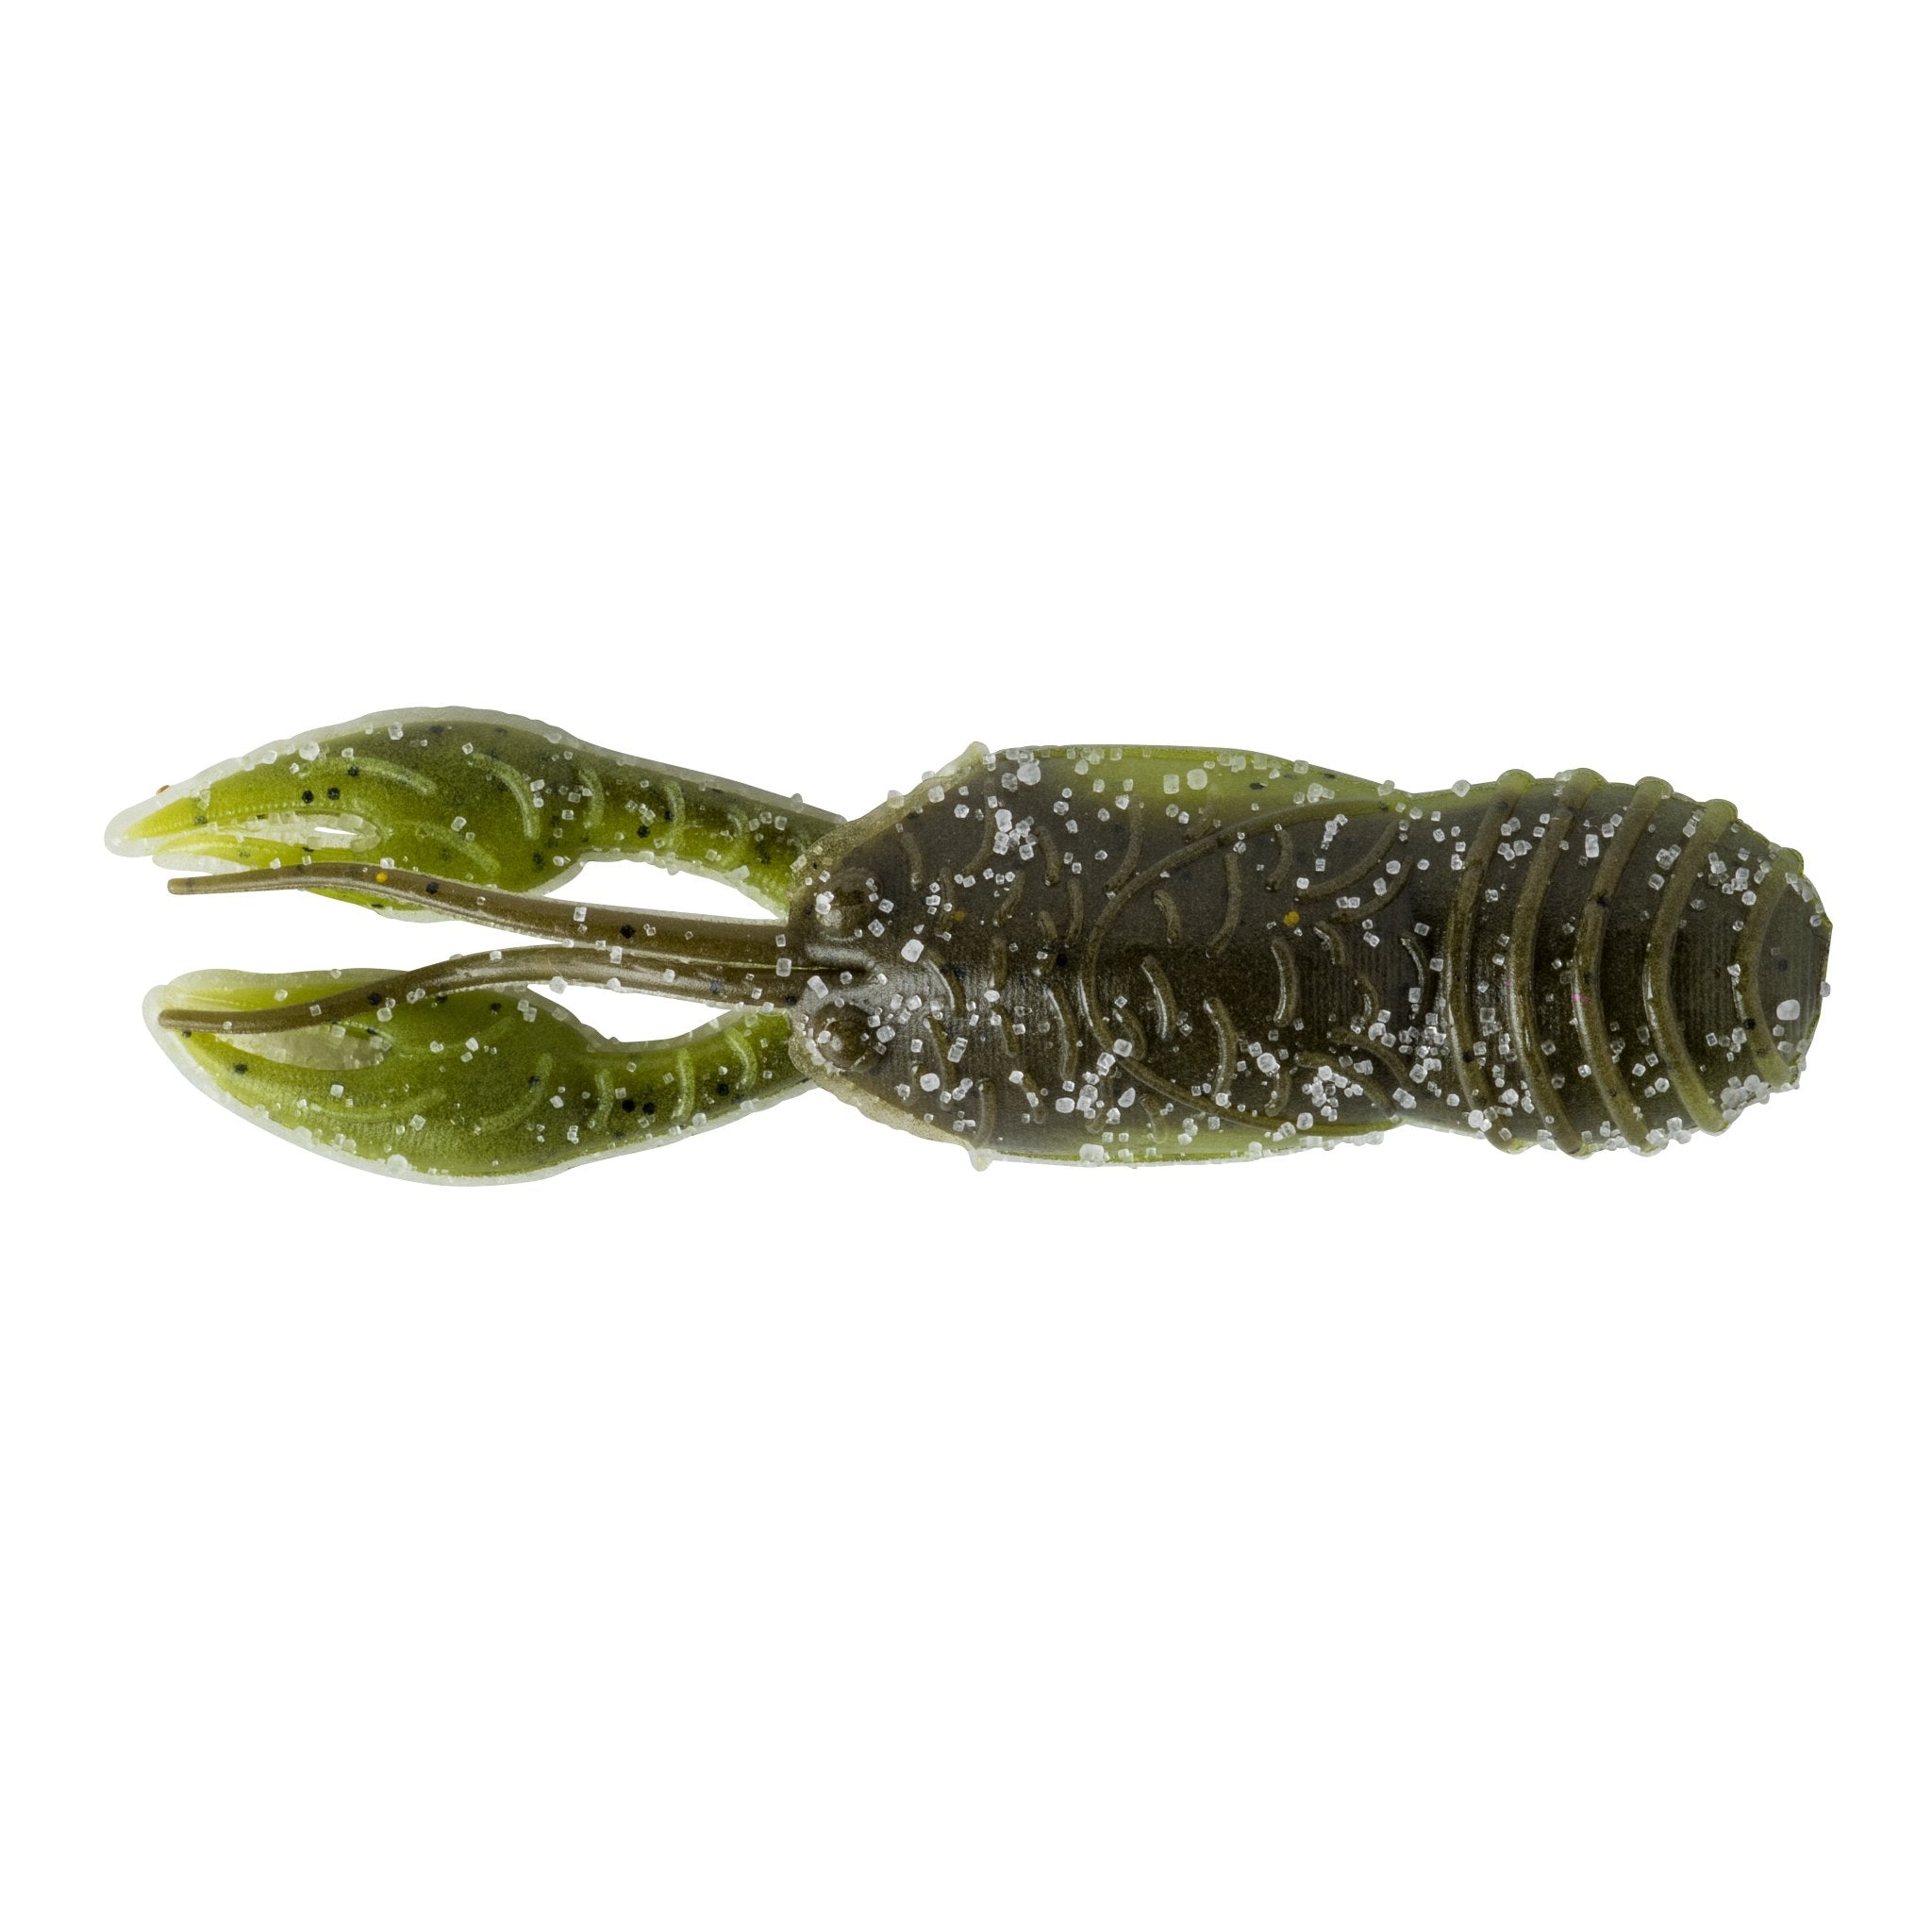 Great Lakes Finesse Juvy Craw 2.5 Green Pumpkin Red Flake